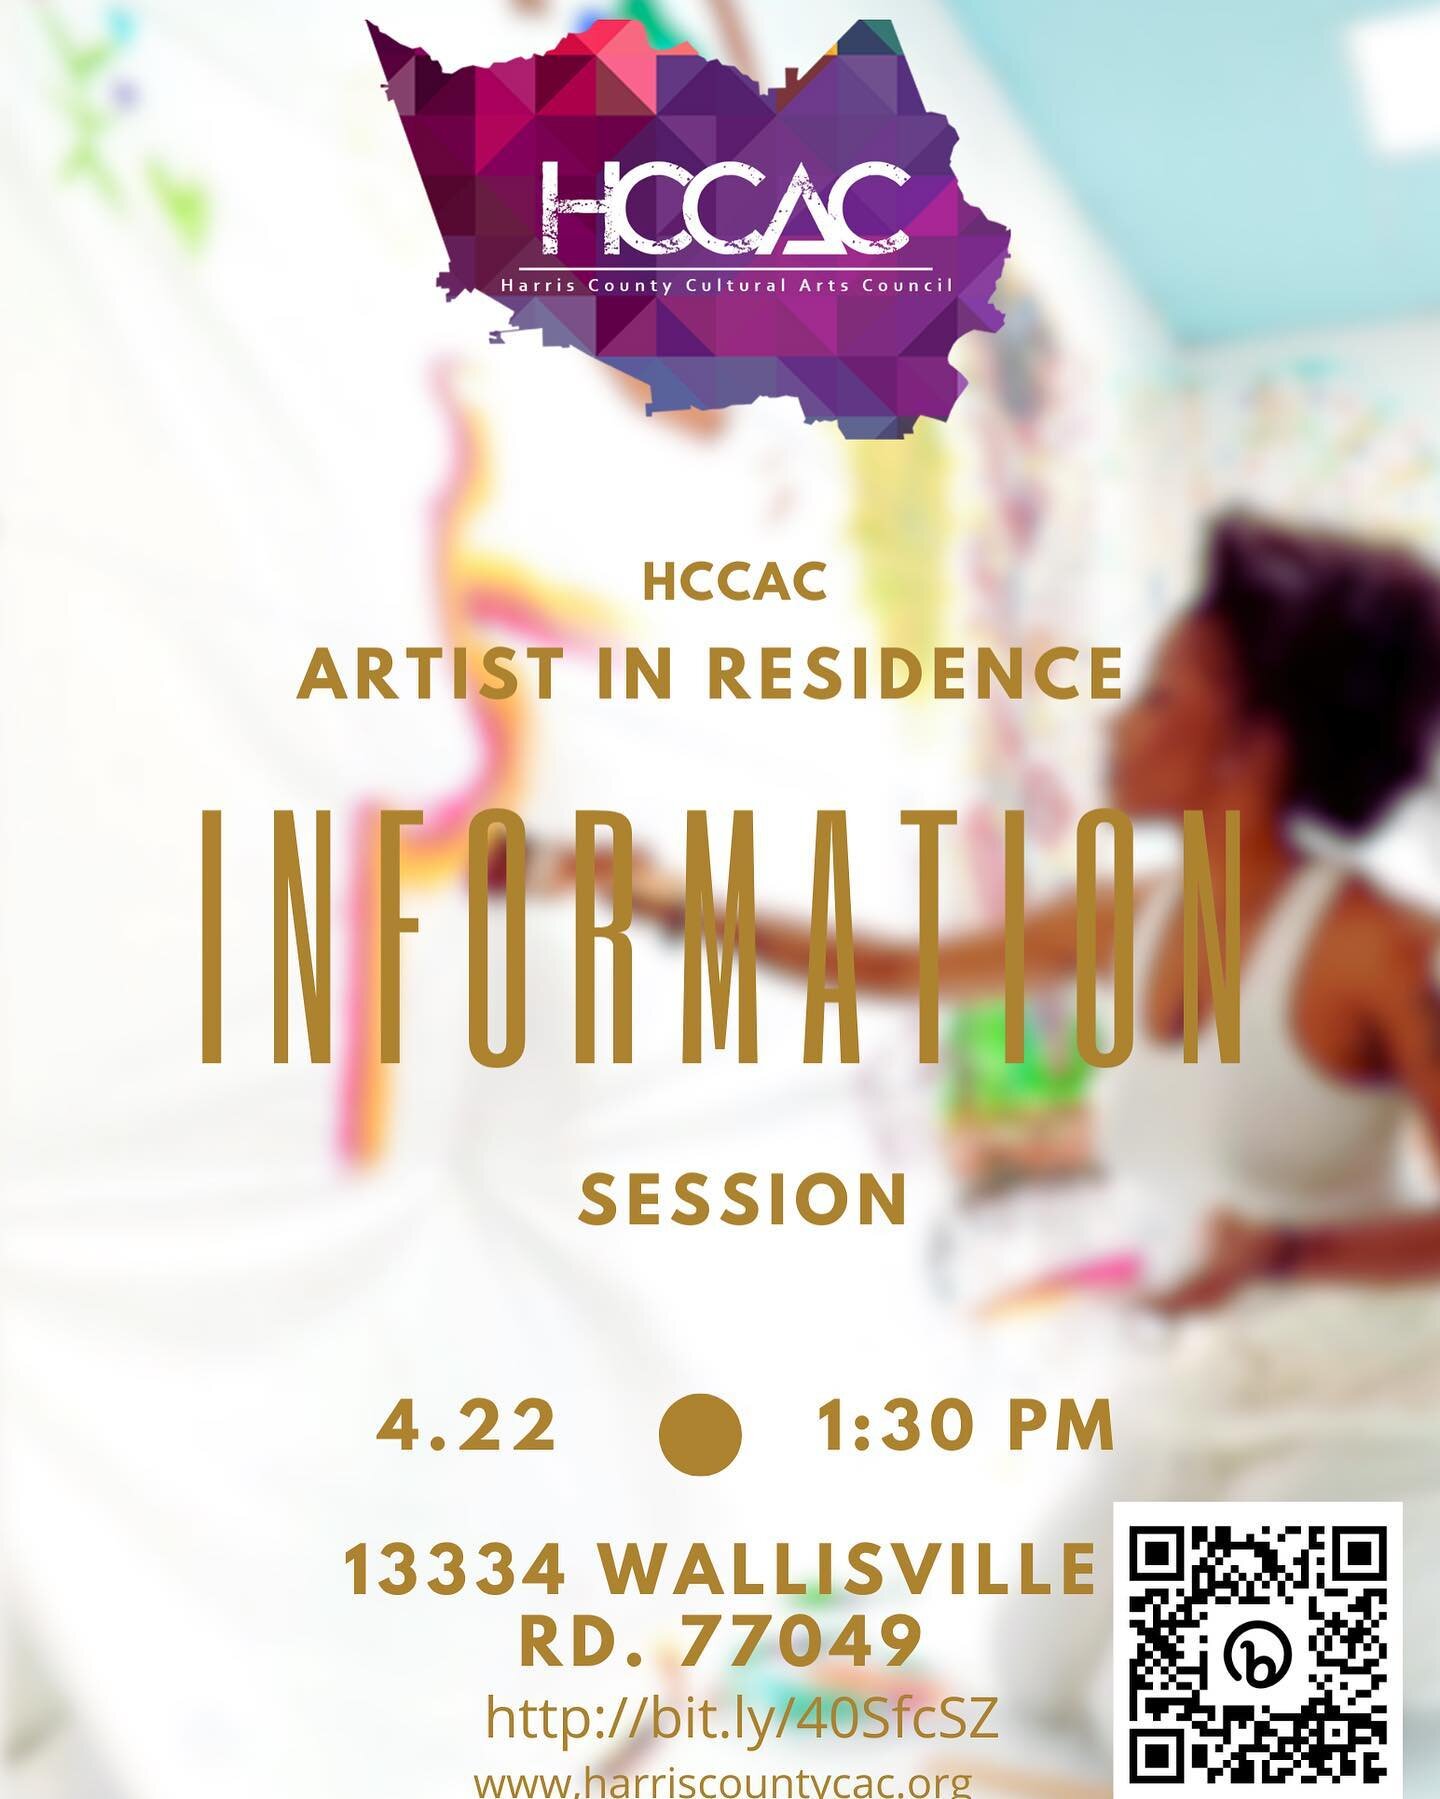 Interested in discovering more about joining our upcoming class of resident artists? We are excited to announce that #HCCAC is hosting an Artist In Residence Information Session and we would love for you to attend!

Attend our session on Saturday, Ap